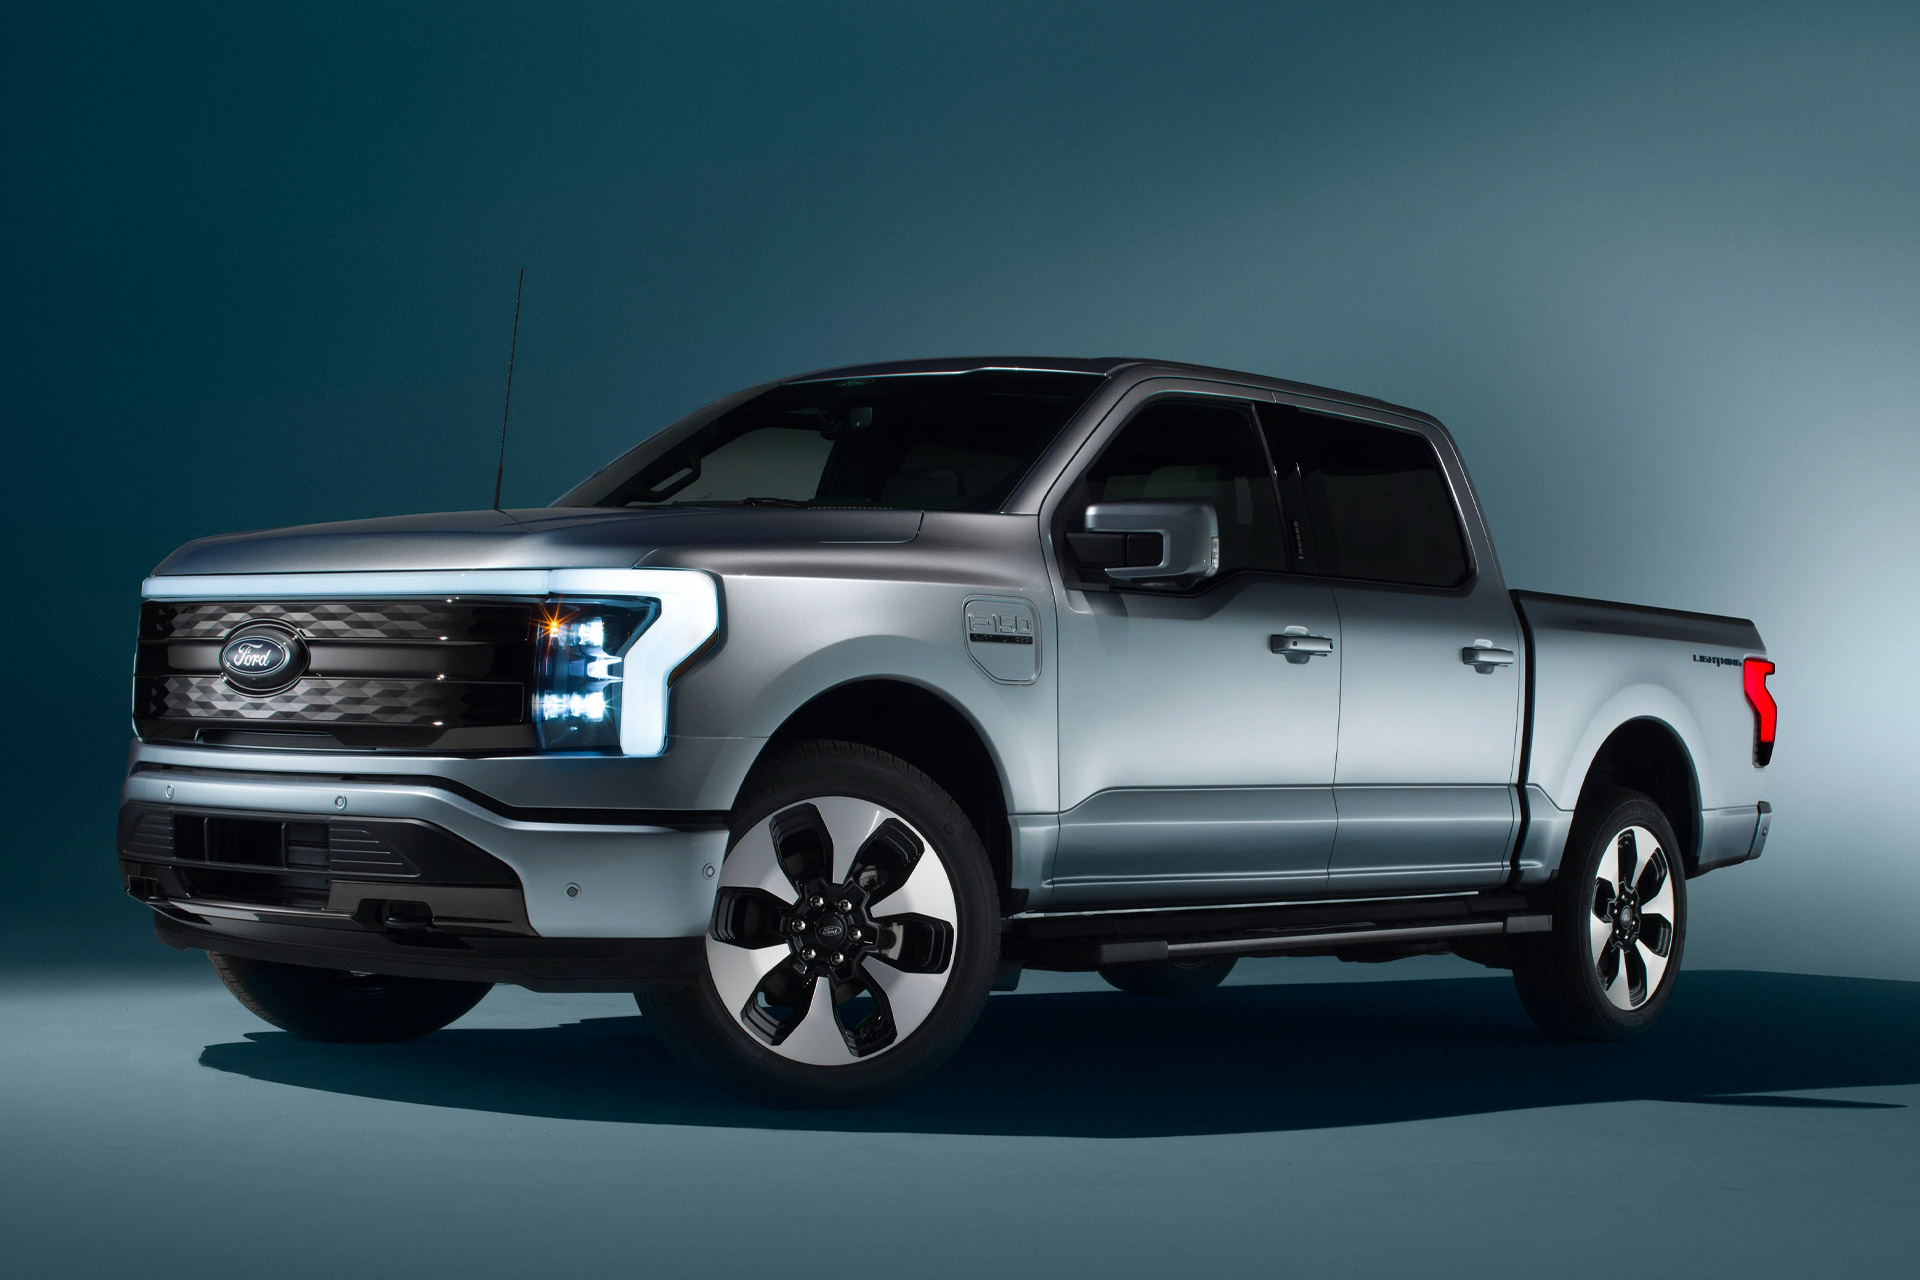 Ford Electric Truck Images The Future Is Fast! The Ford F150